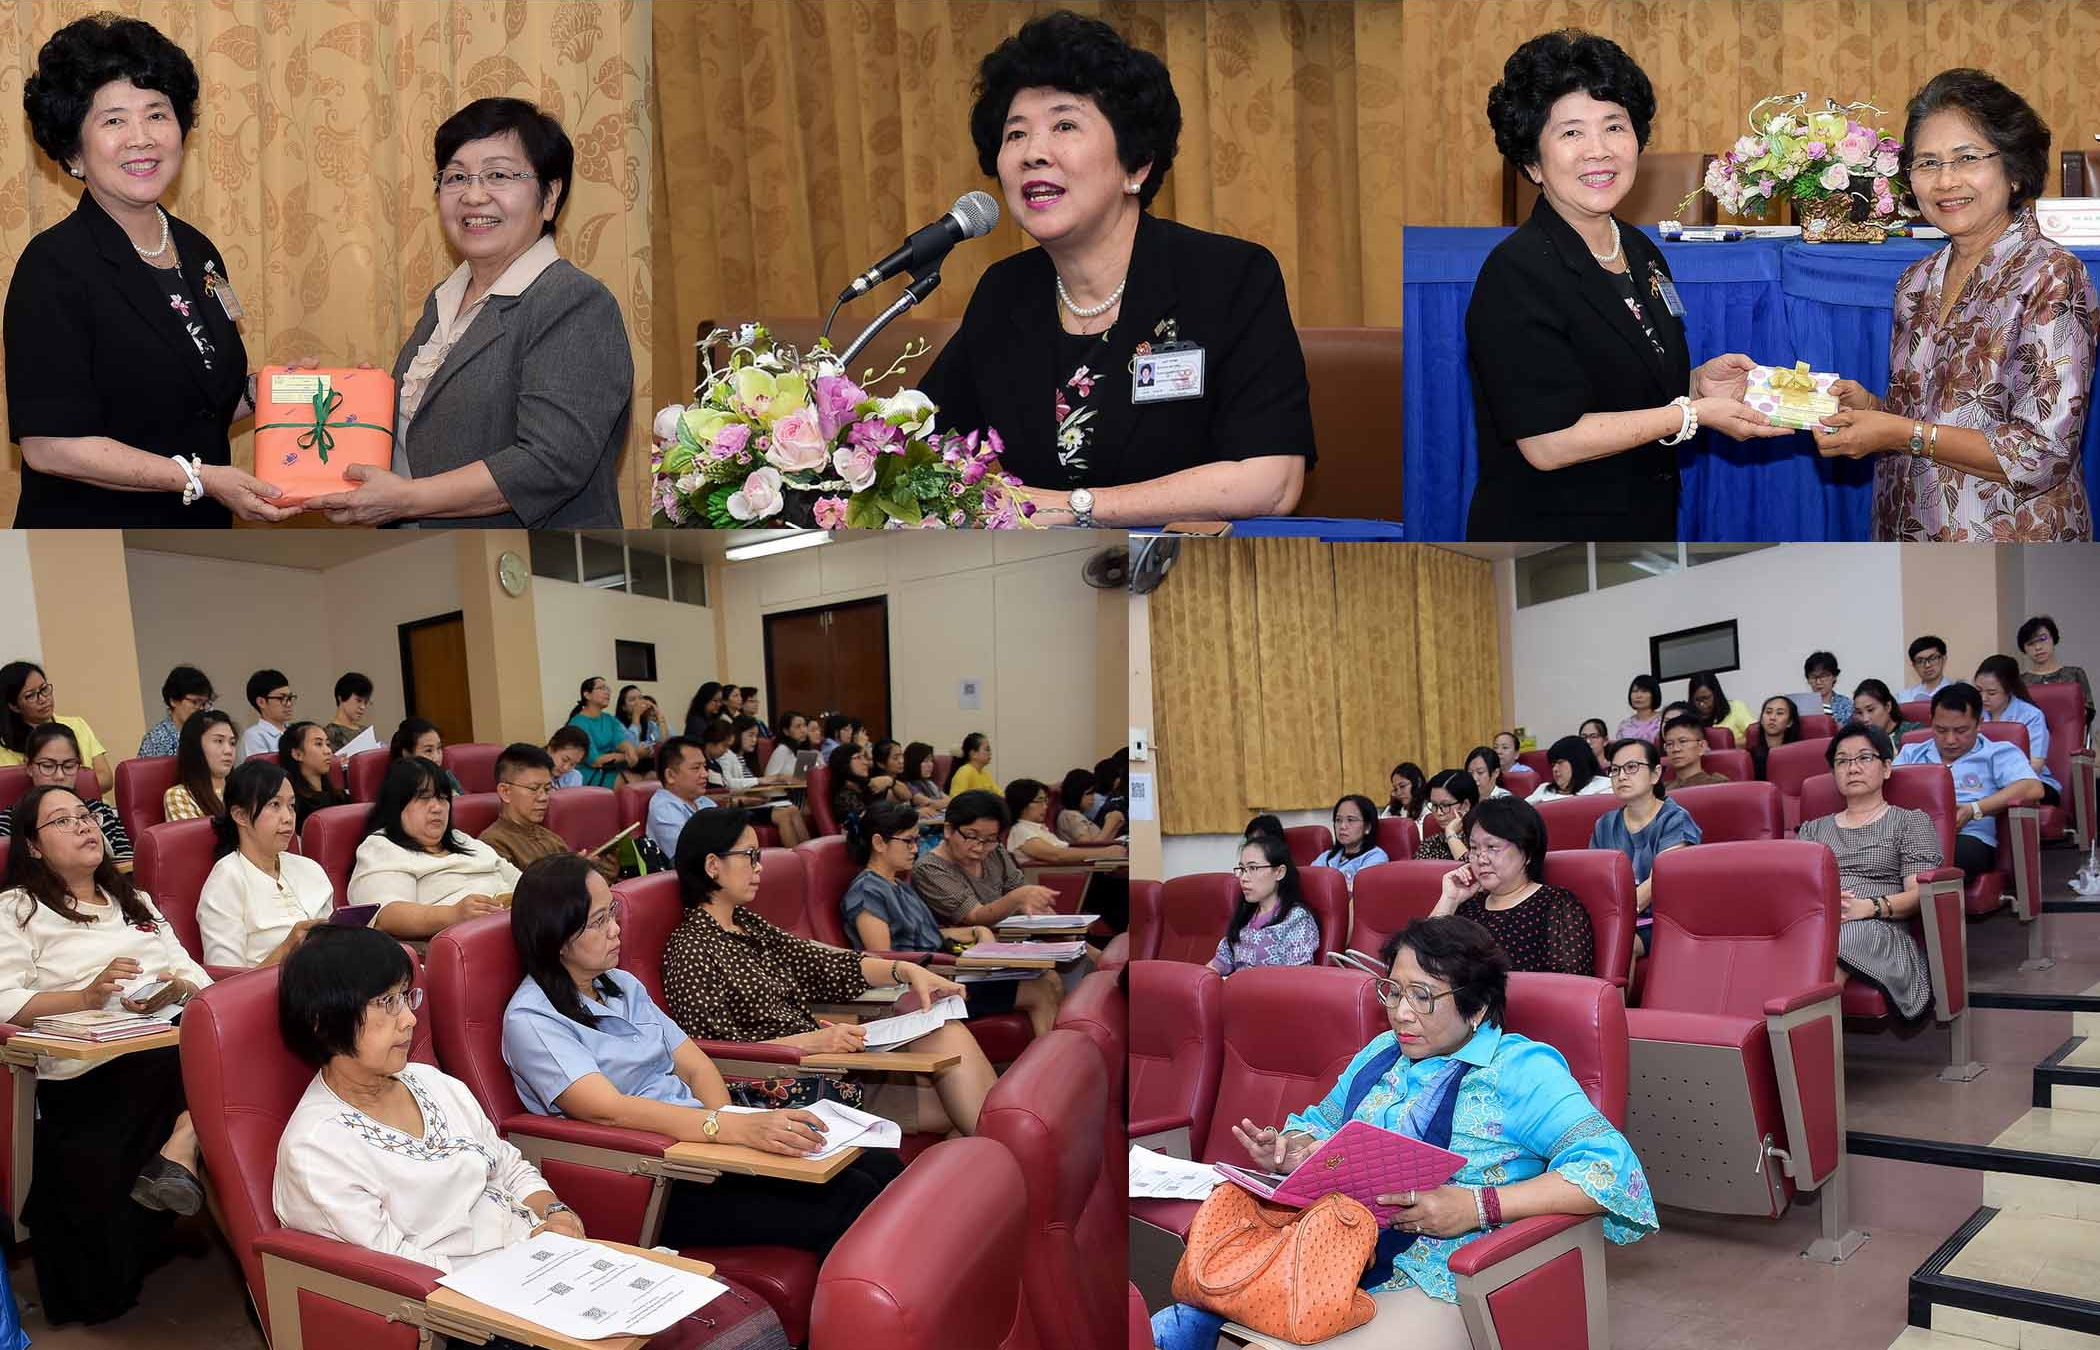 
	Seminar on Educational Management towards Excellent Outcomes
